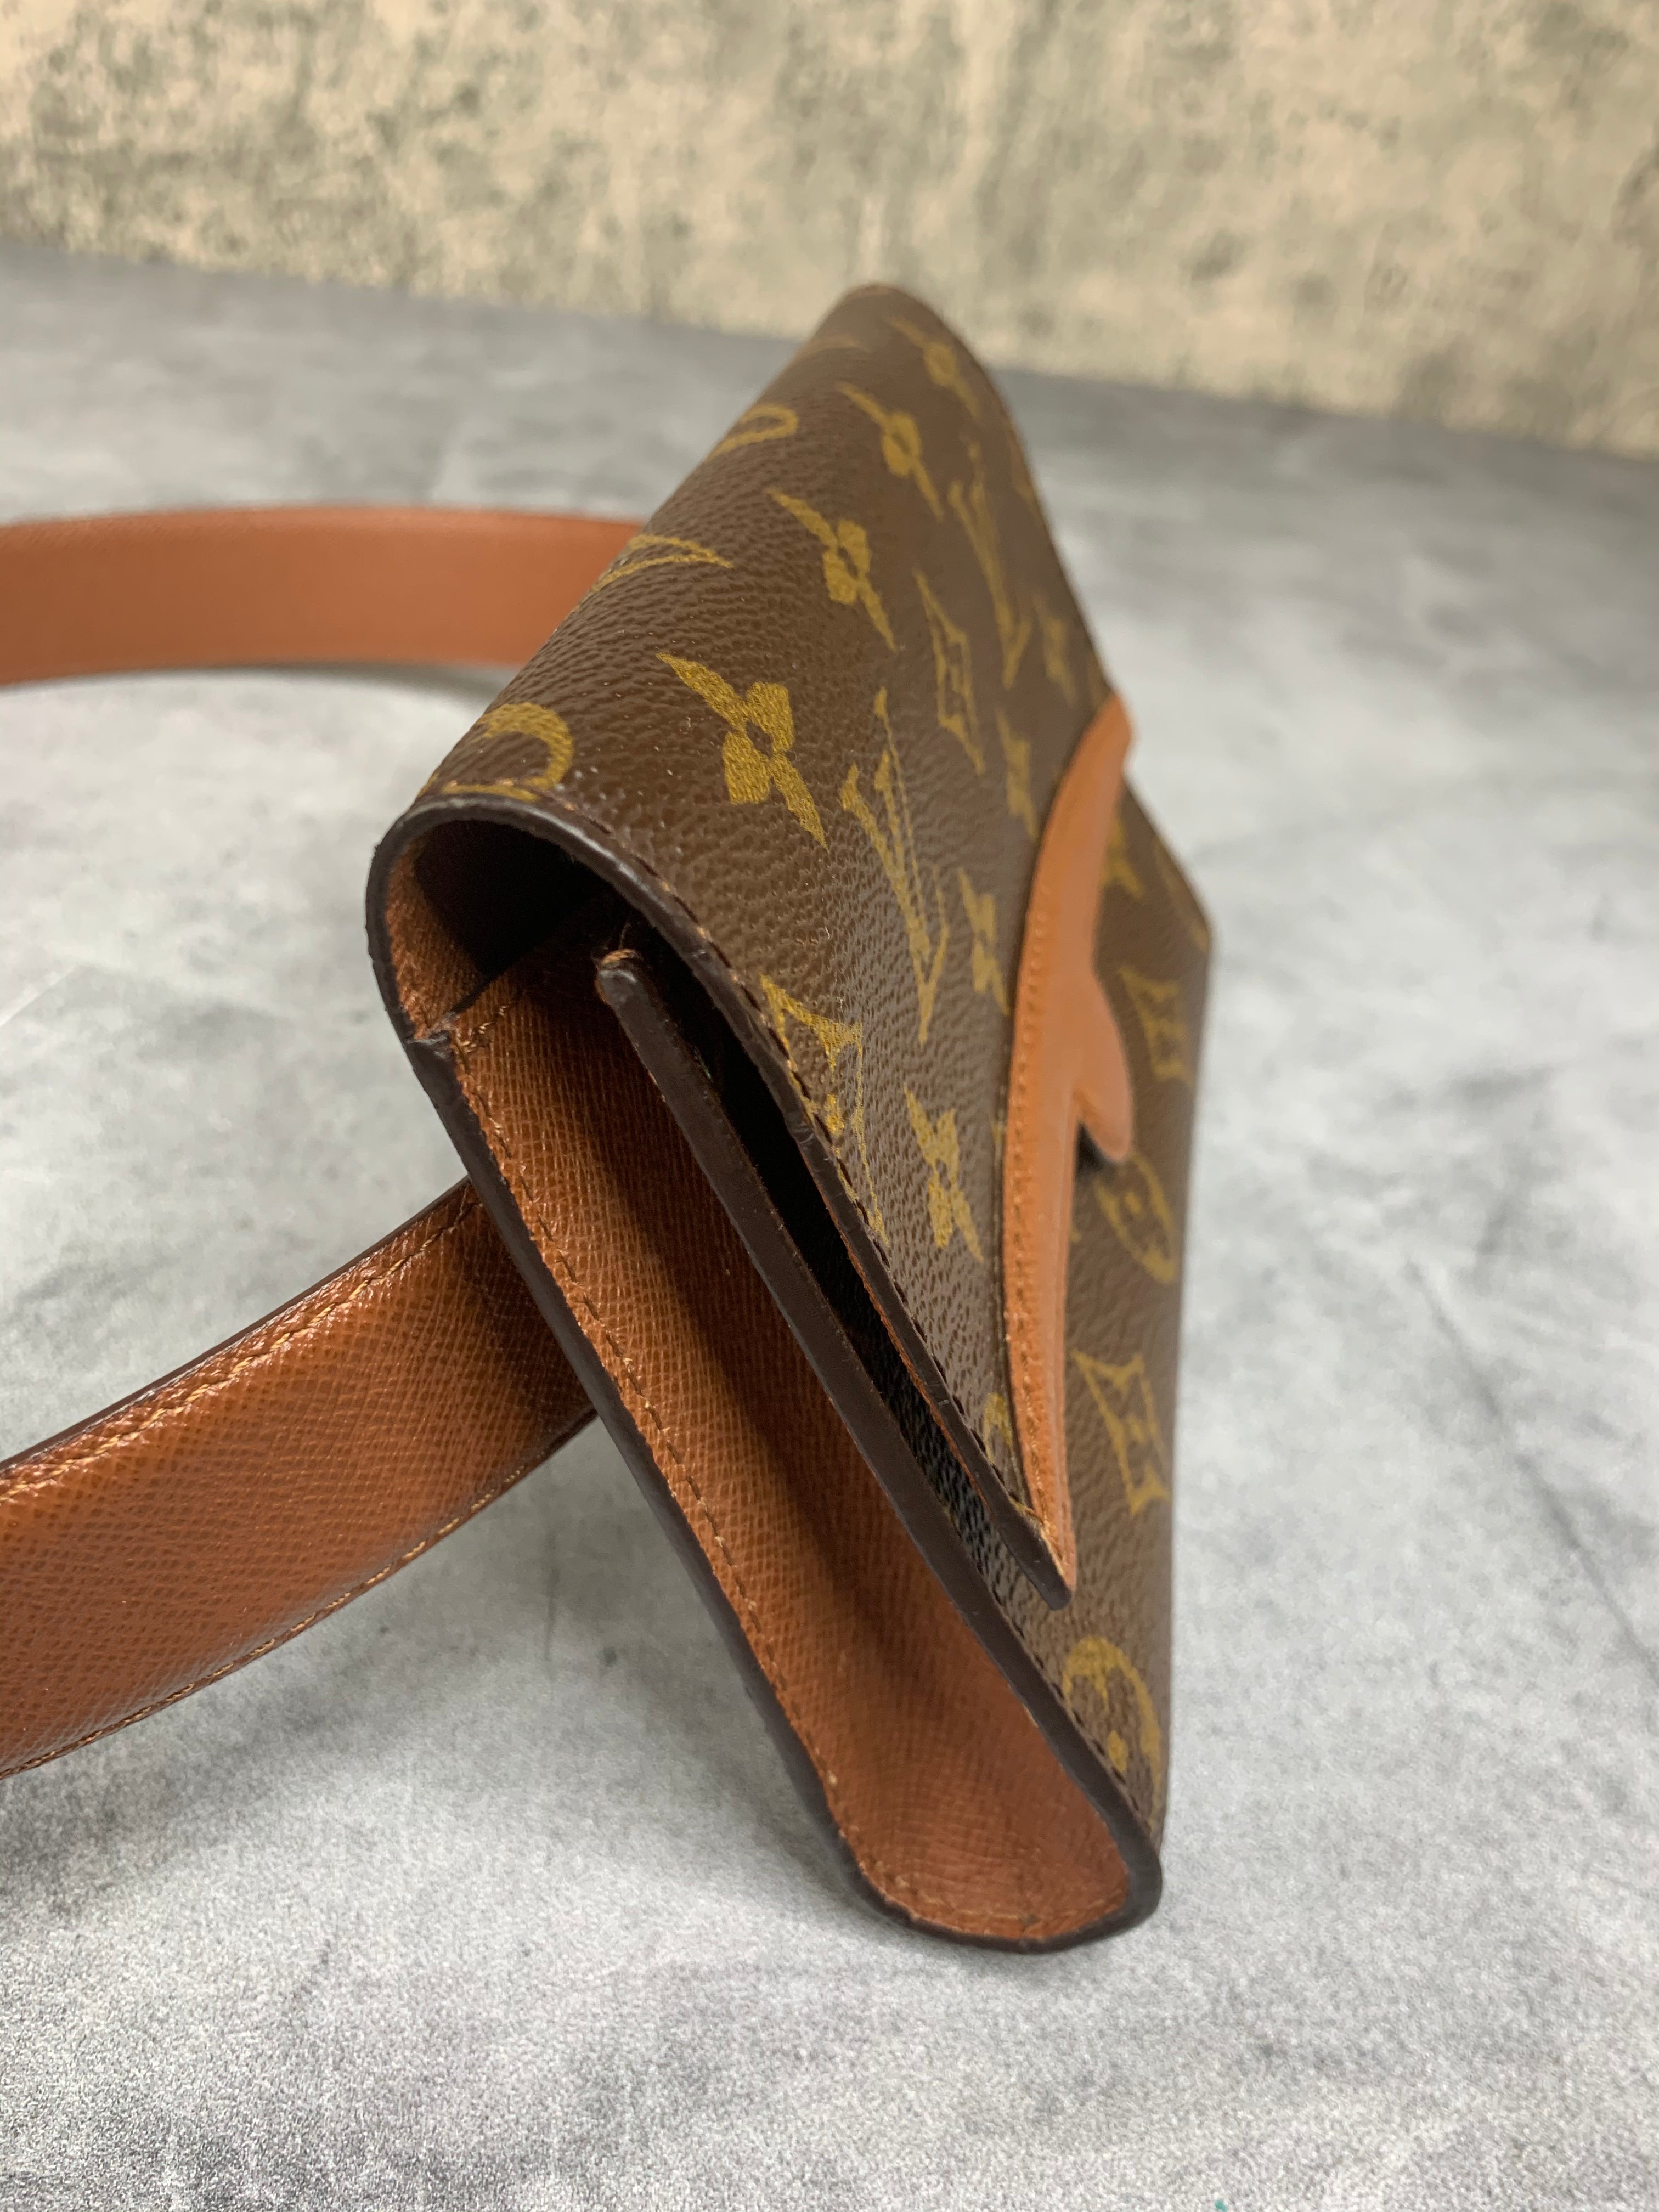 Shop the Latest Louis Vuitton Waist Bags in the Philippines in